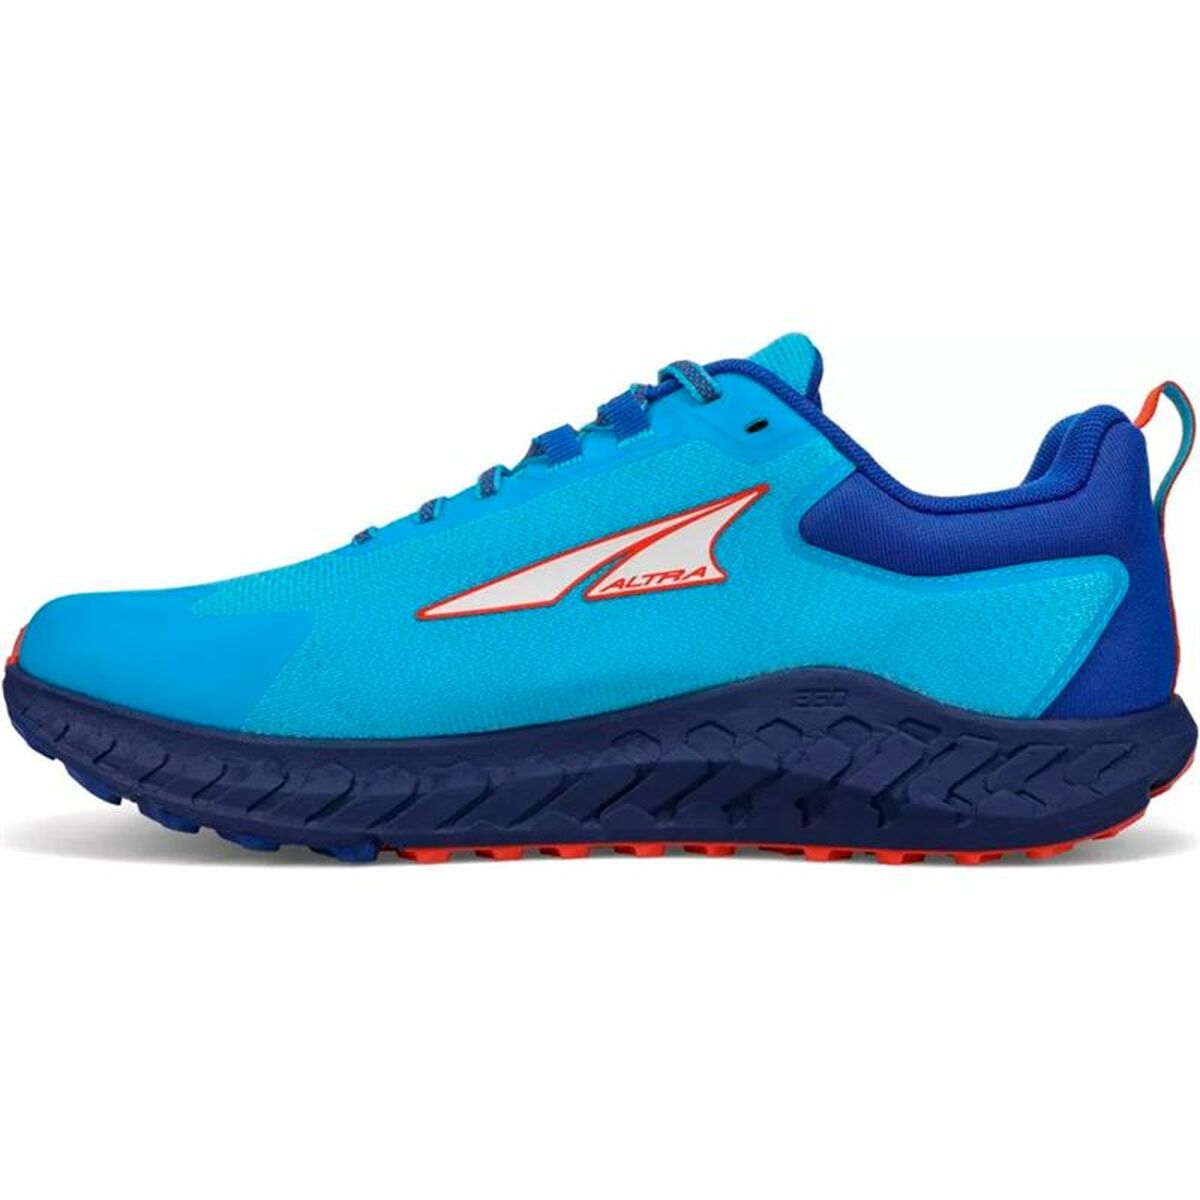 Men's Trainers Altra Outroad 2 Blue